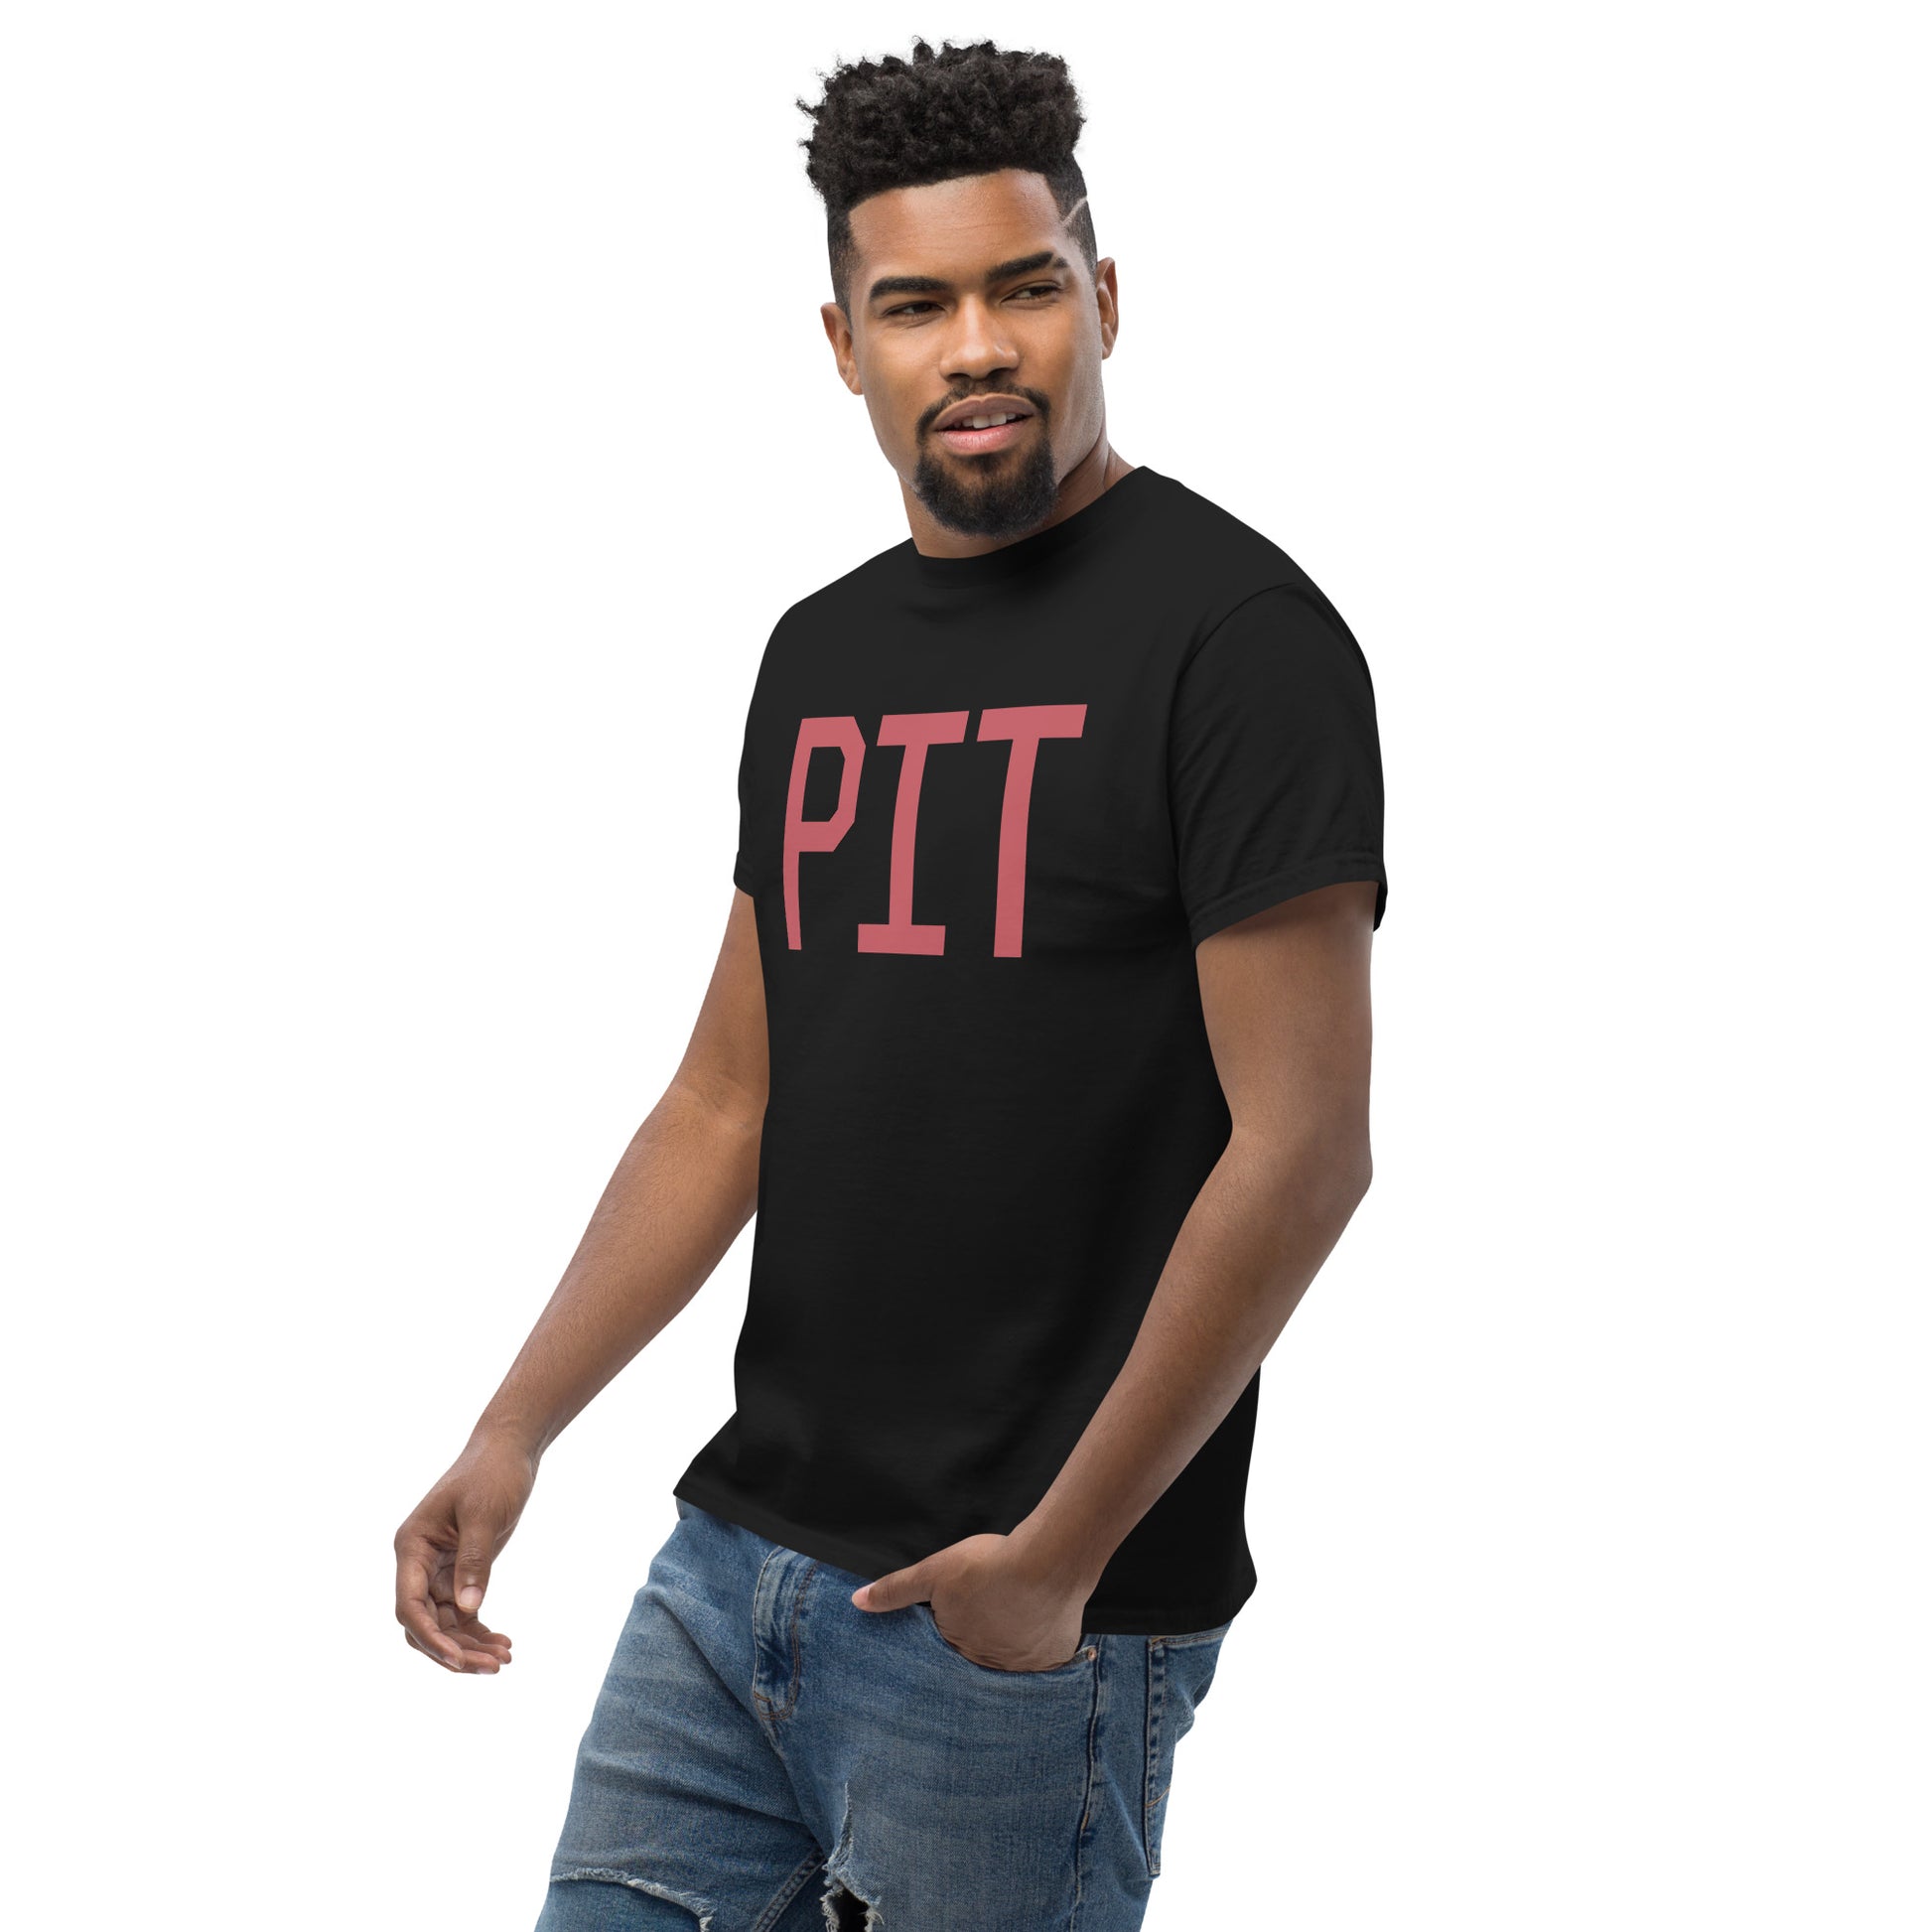 Aviation Enthusiast Men's Tee - Deep Pink Graphic • PIT Pittsburgh • YHM Designs - Image 07